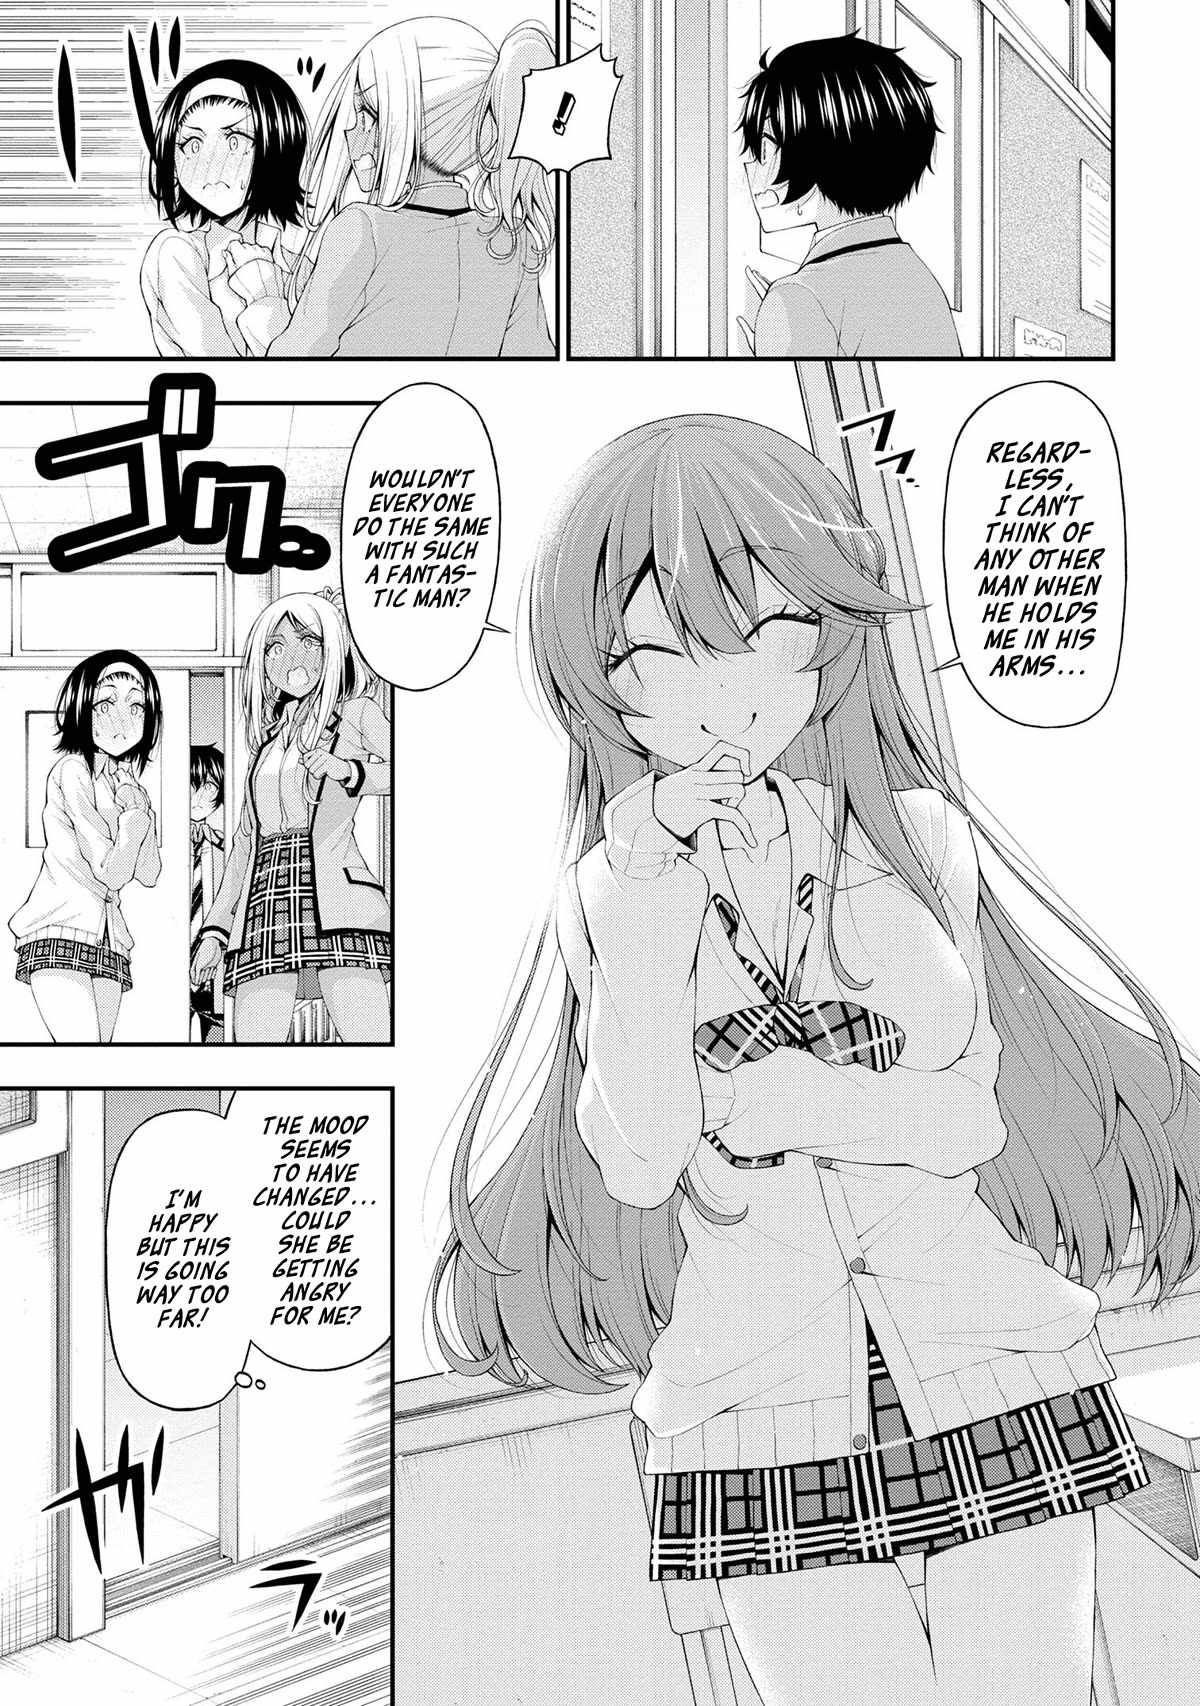 The Gal Who Was Meant to Confess to Me as a Game Punishment Has Apparently Fallen in Love with Me Chapter 13-eng-li - Page 10